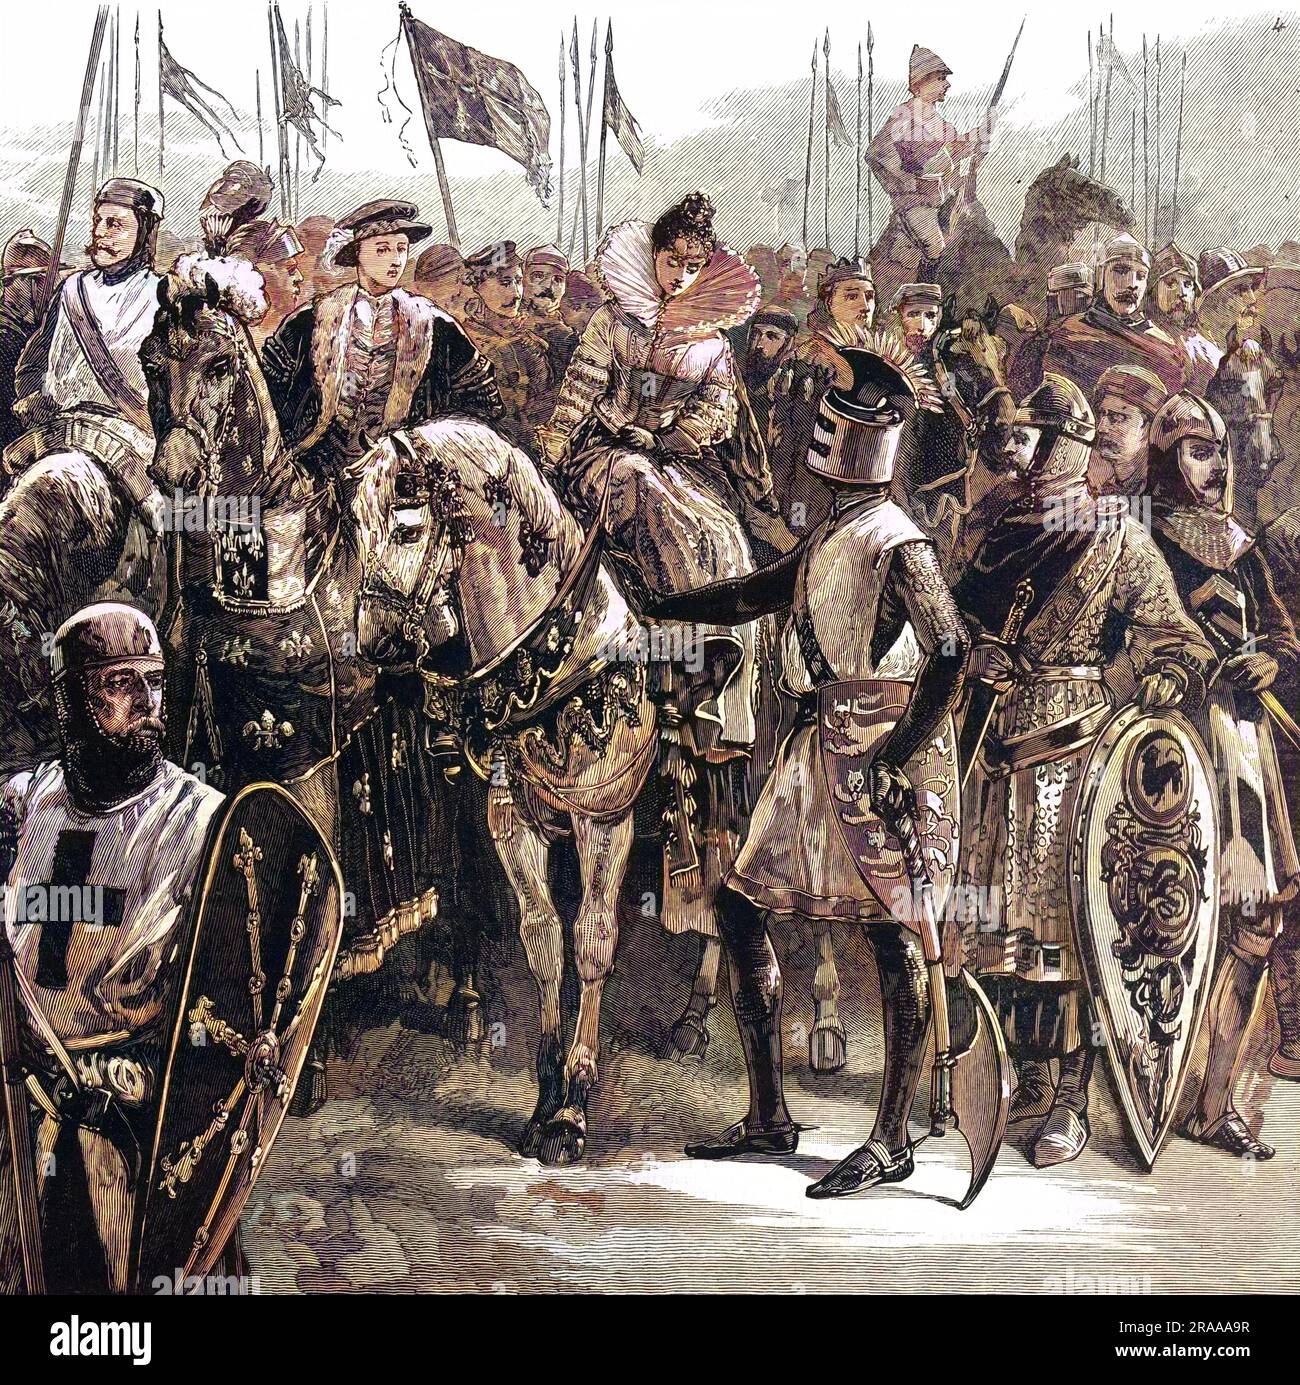 Kings and Queens of England with Barons, Knights and Crusaders who were all part of the Lord Mayor of London's Show of 1884. At centre, Richard I comforts the horse of Queen Elizabeth I.     Date: 1884 Stock Photo